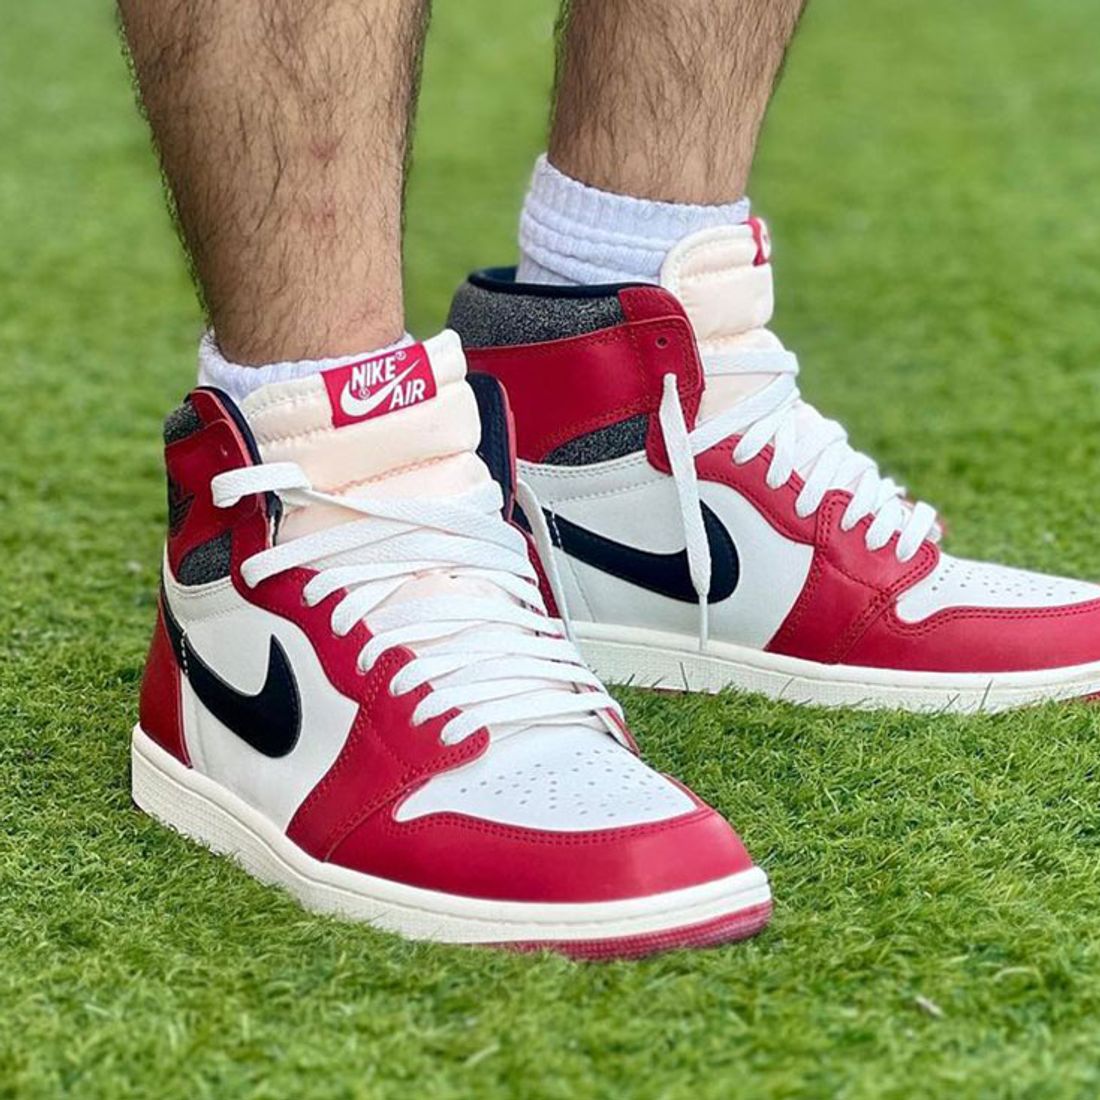 Fauteuil bunker Persoonlijk Here's How to Style the Air Jordan 1 'Lost and Found' - Sneaker Freaker